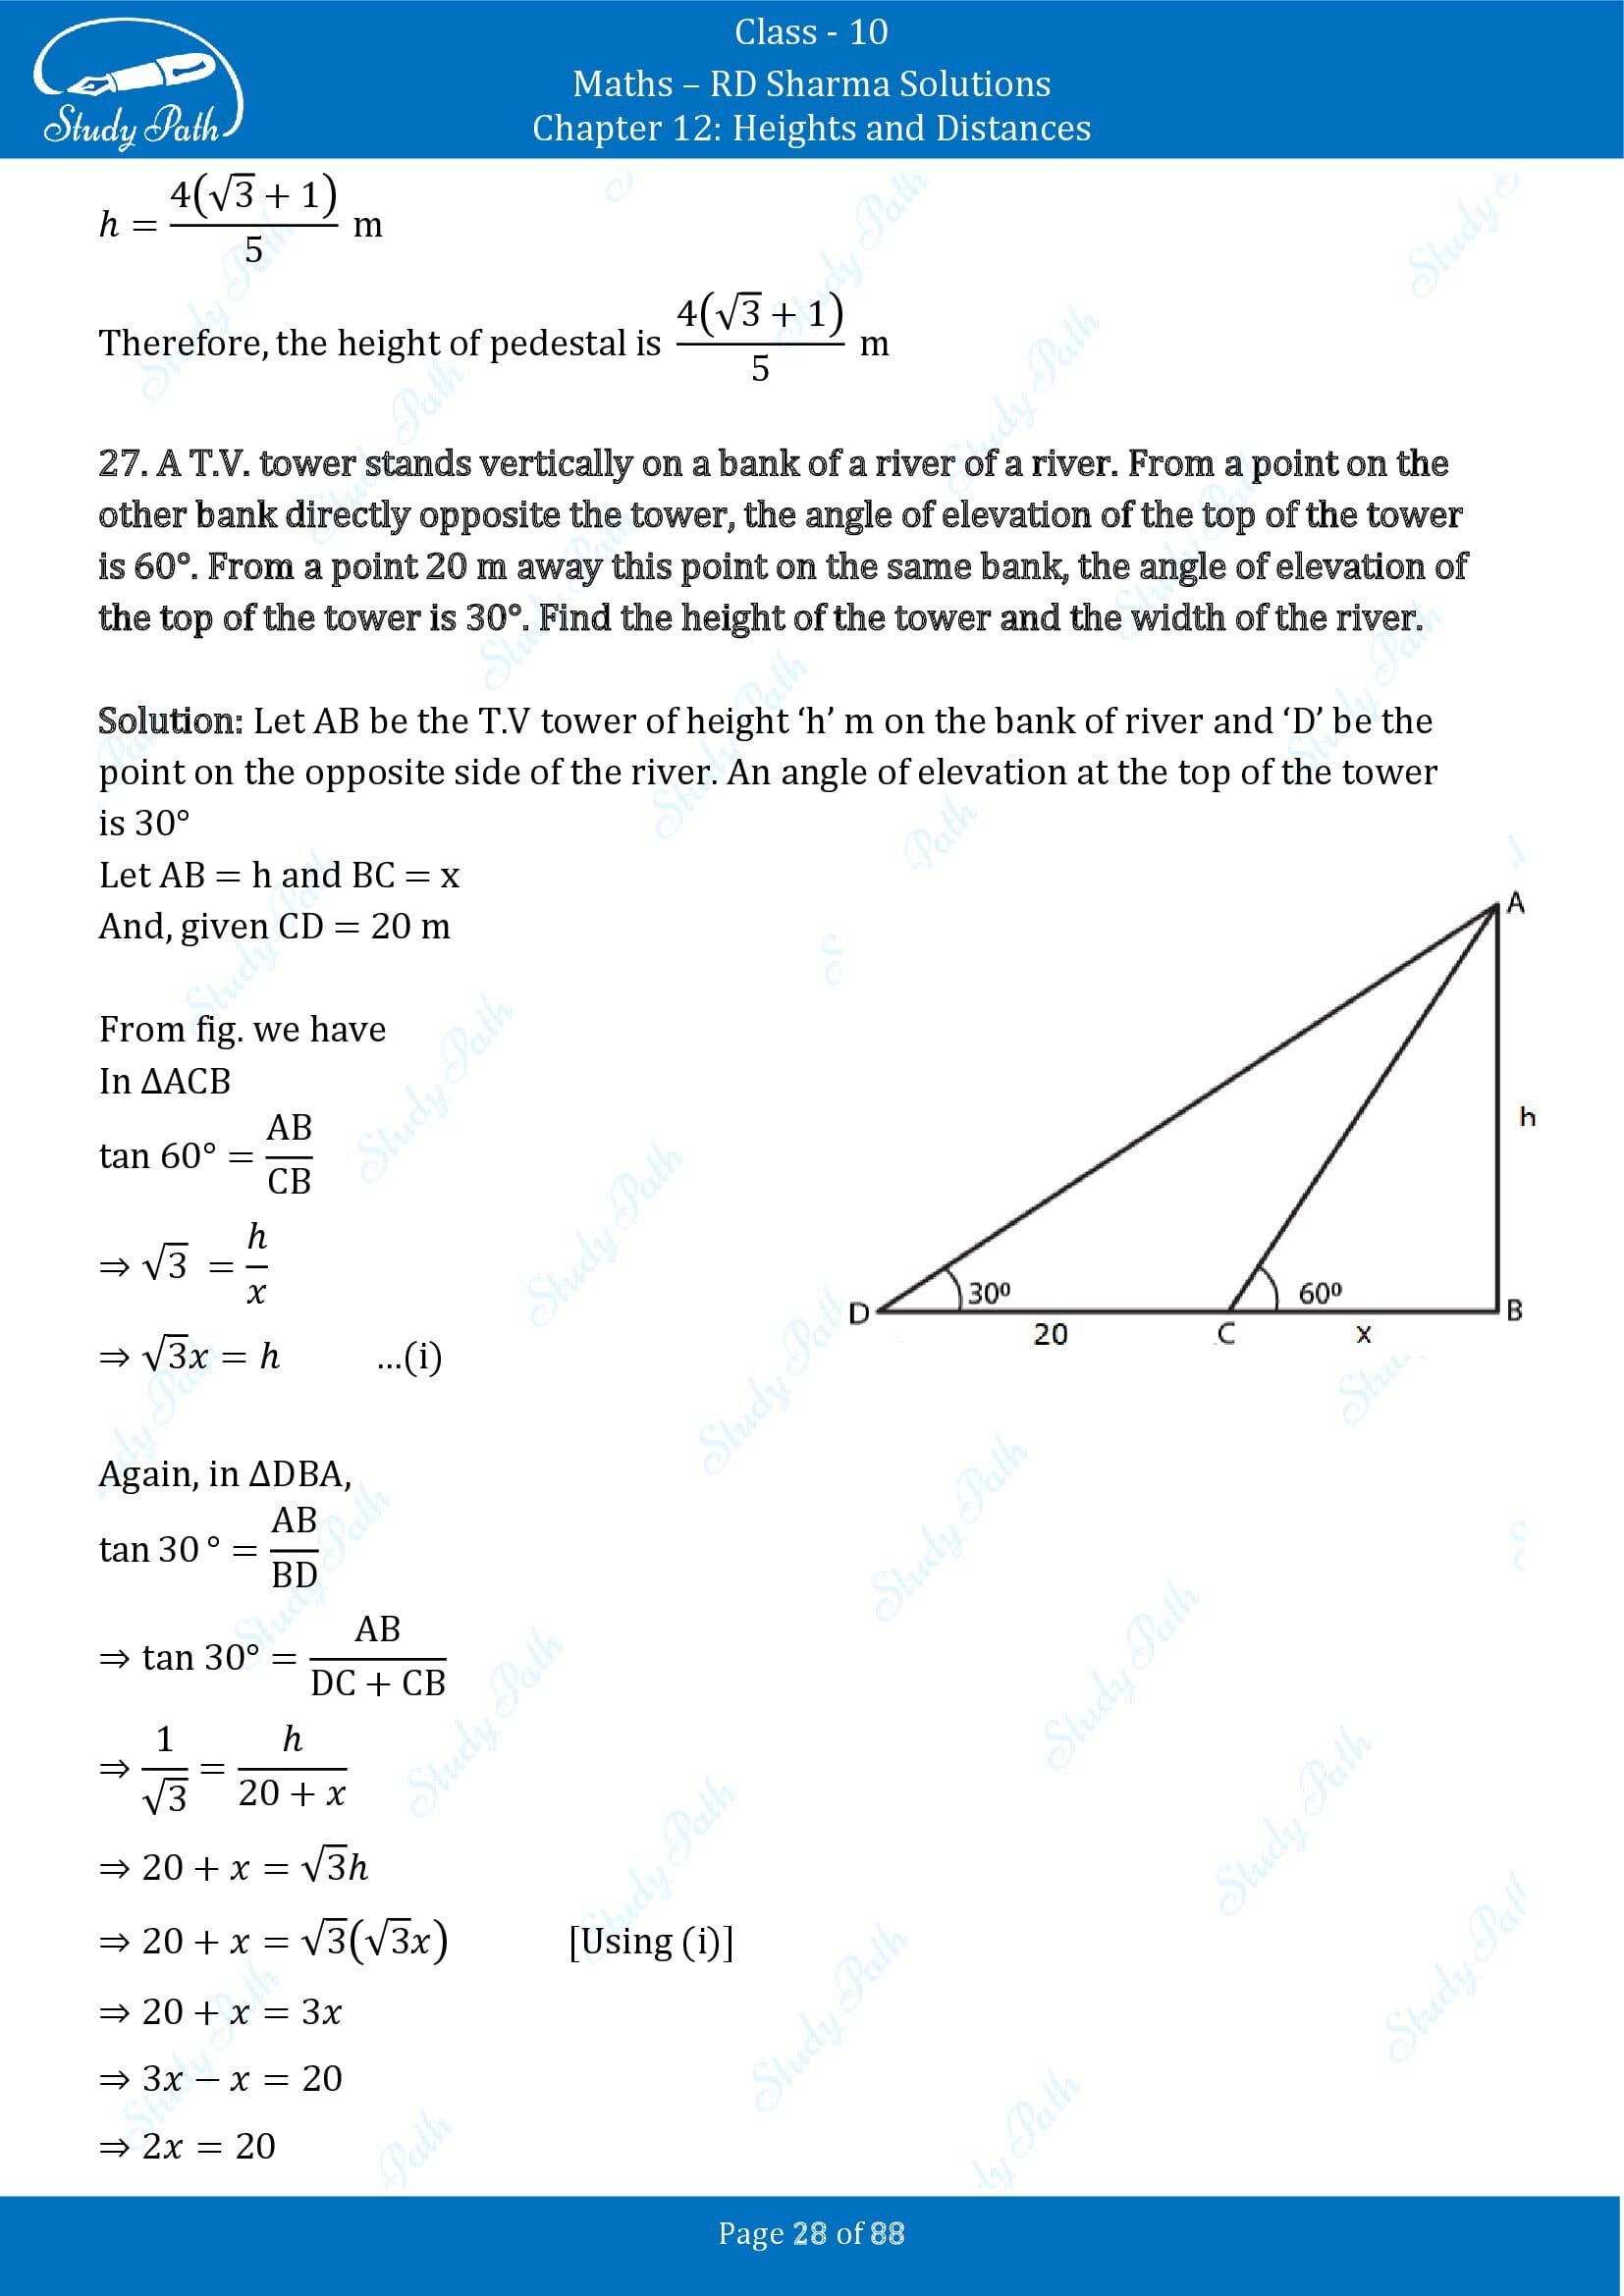 RD Sharma Solutions Class 10 Chapter 12 Heights and Distances Exercise 12.1 00028